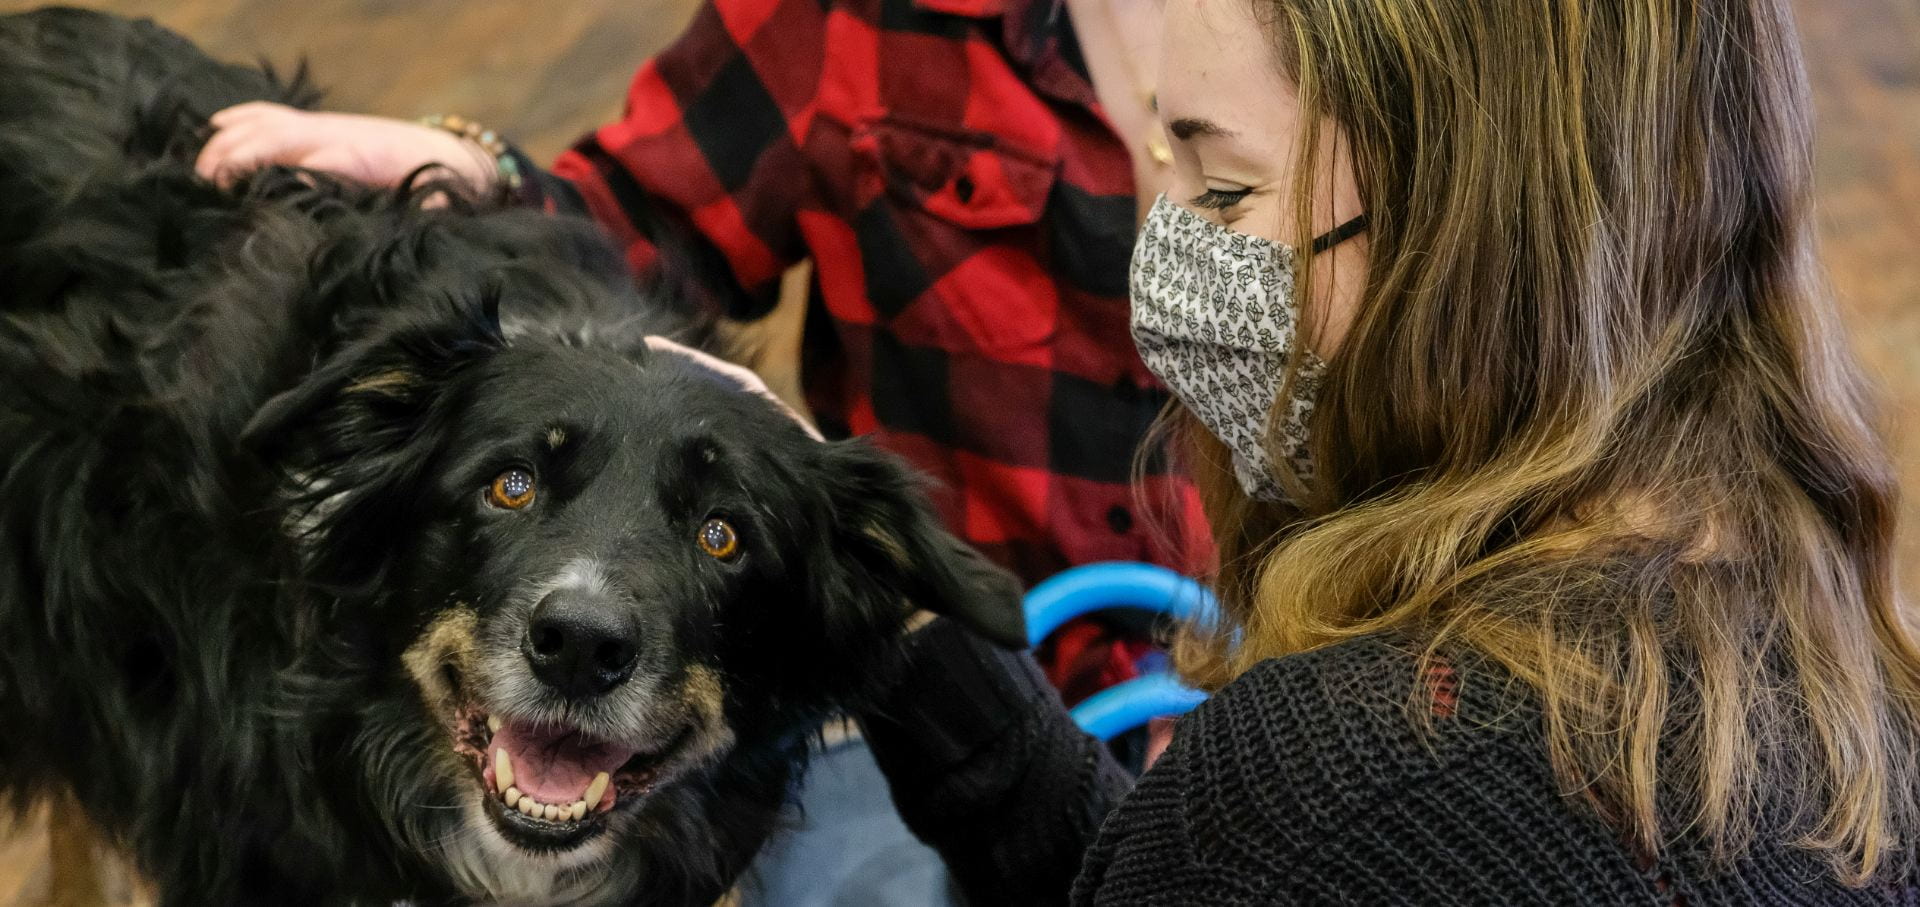 Mith, a 11-year-old Border Collie, looks at the camera as two UW-Green Bay students pet him.